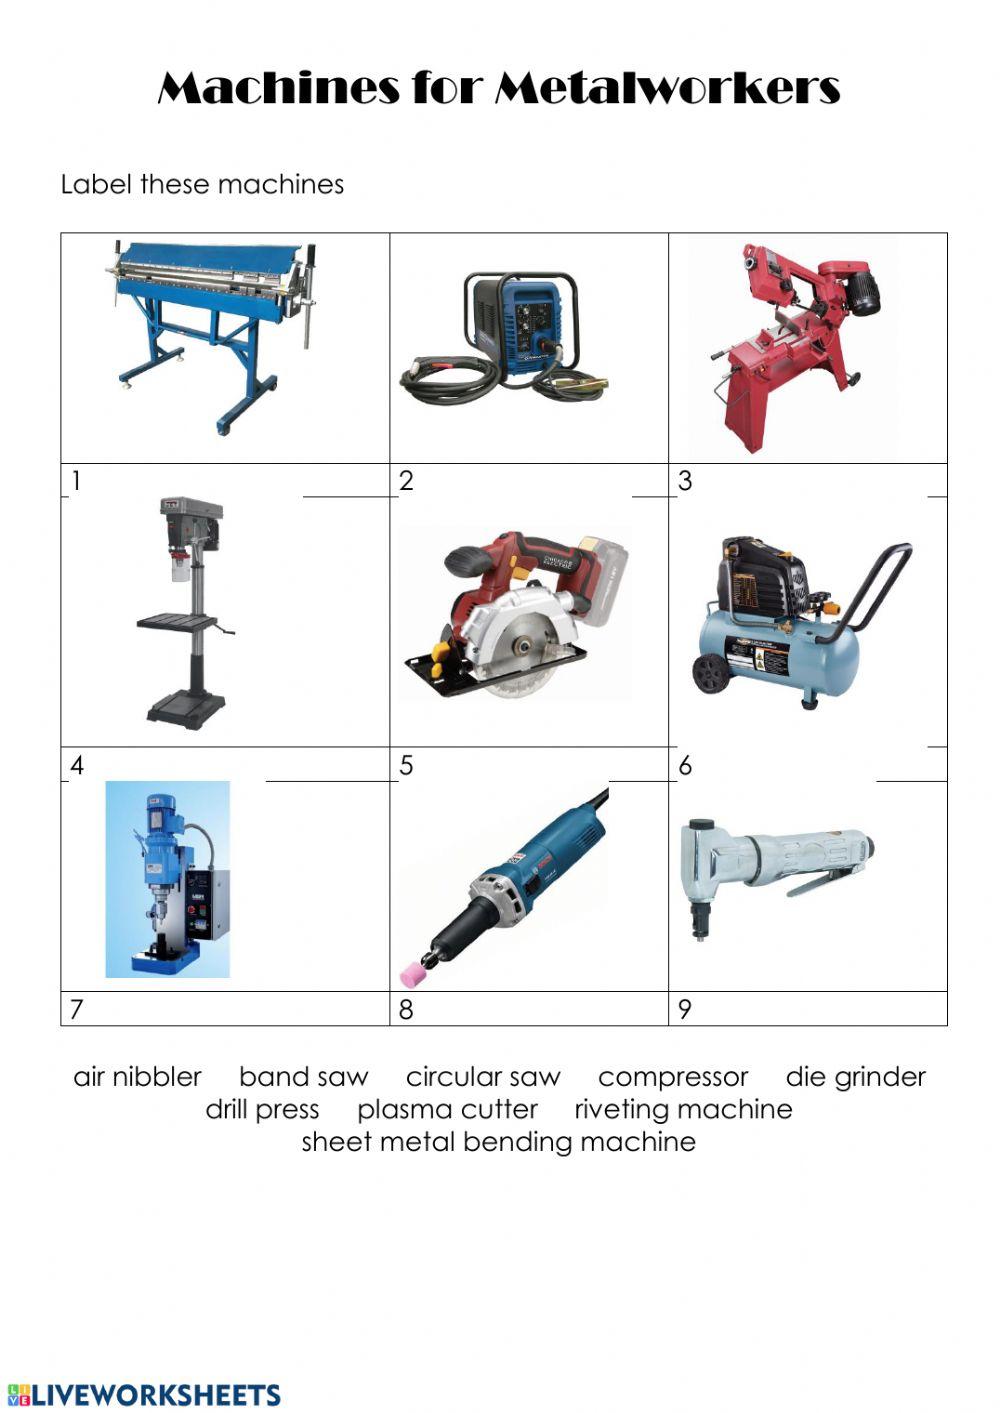 Machines for metalworkers